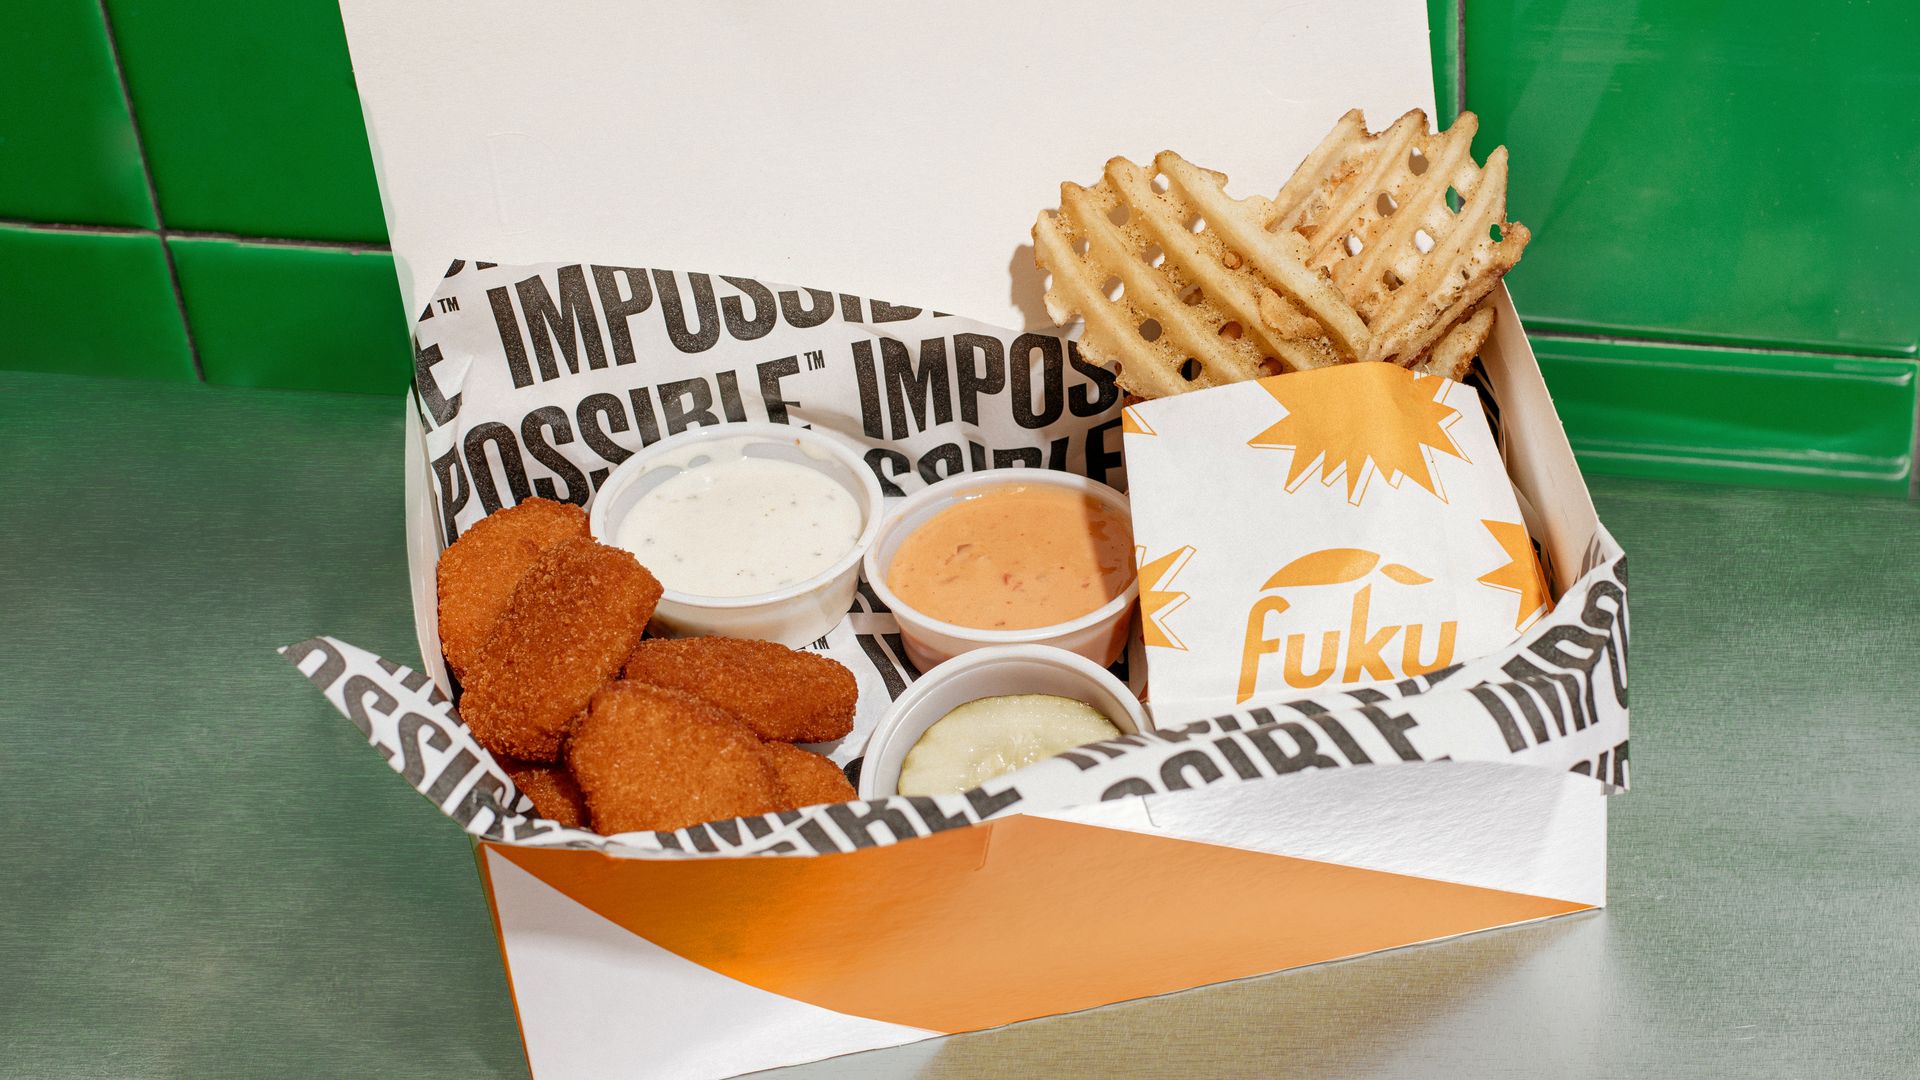 A box with chicken nuggets, waffle fries and sauces